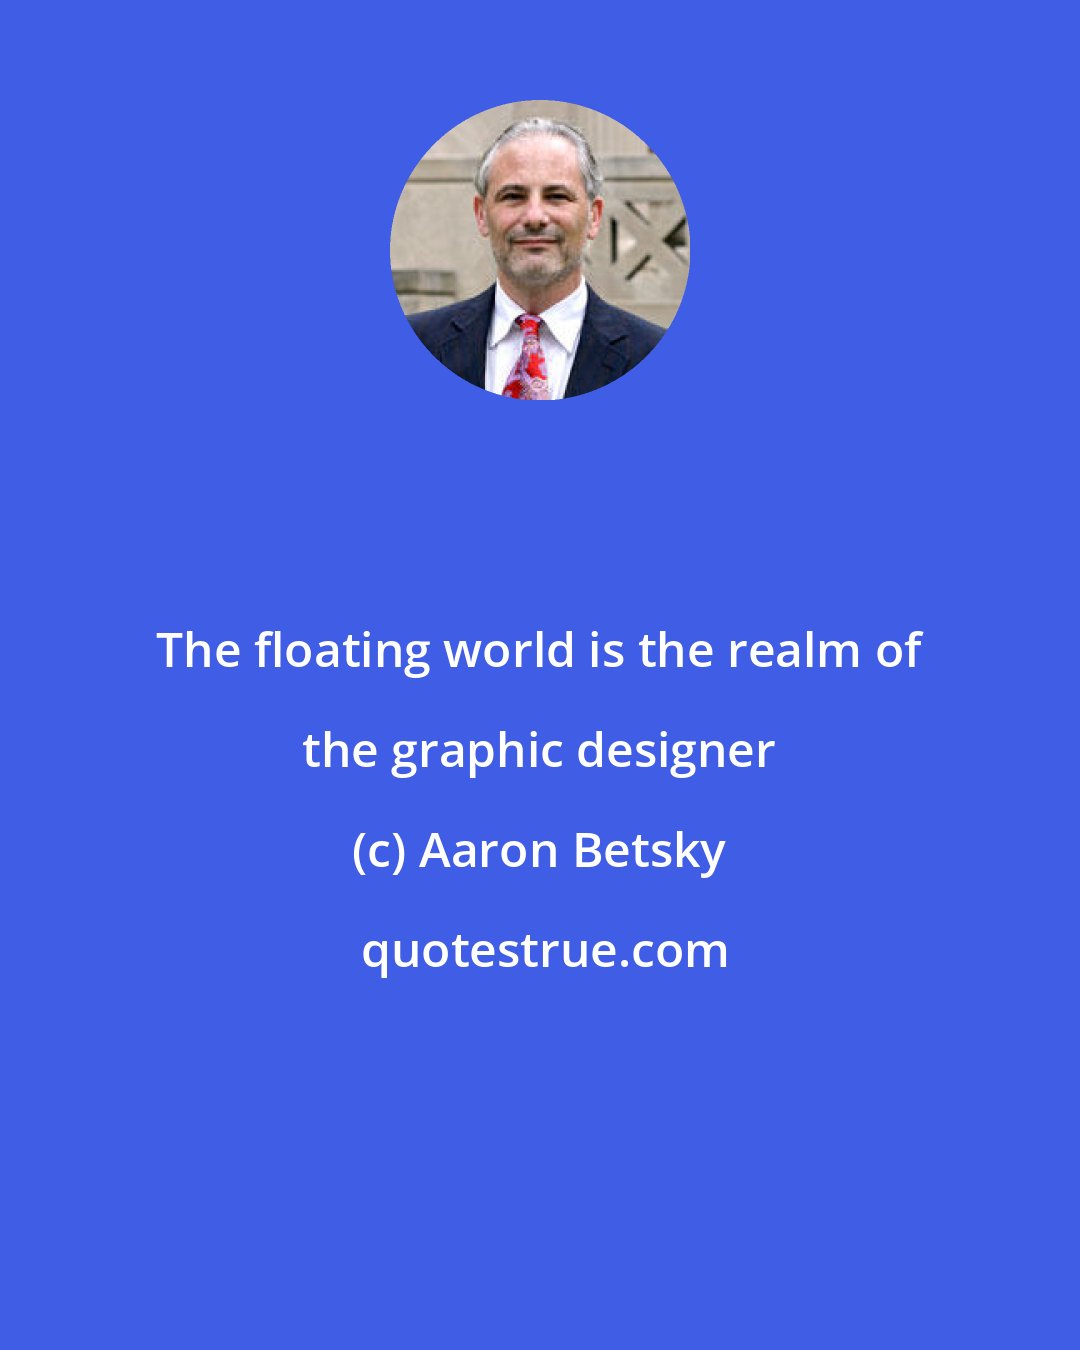 Aaron Betsky: The floating world is the realm of the graphic designer